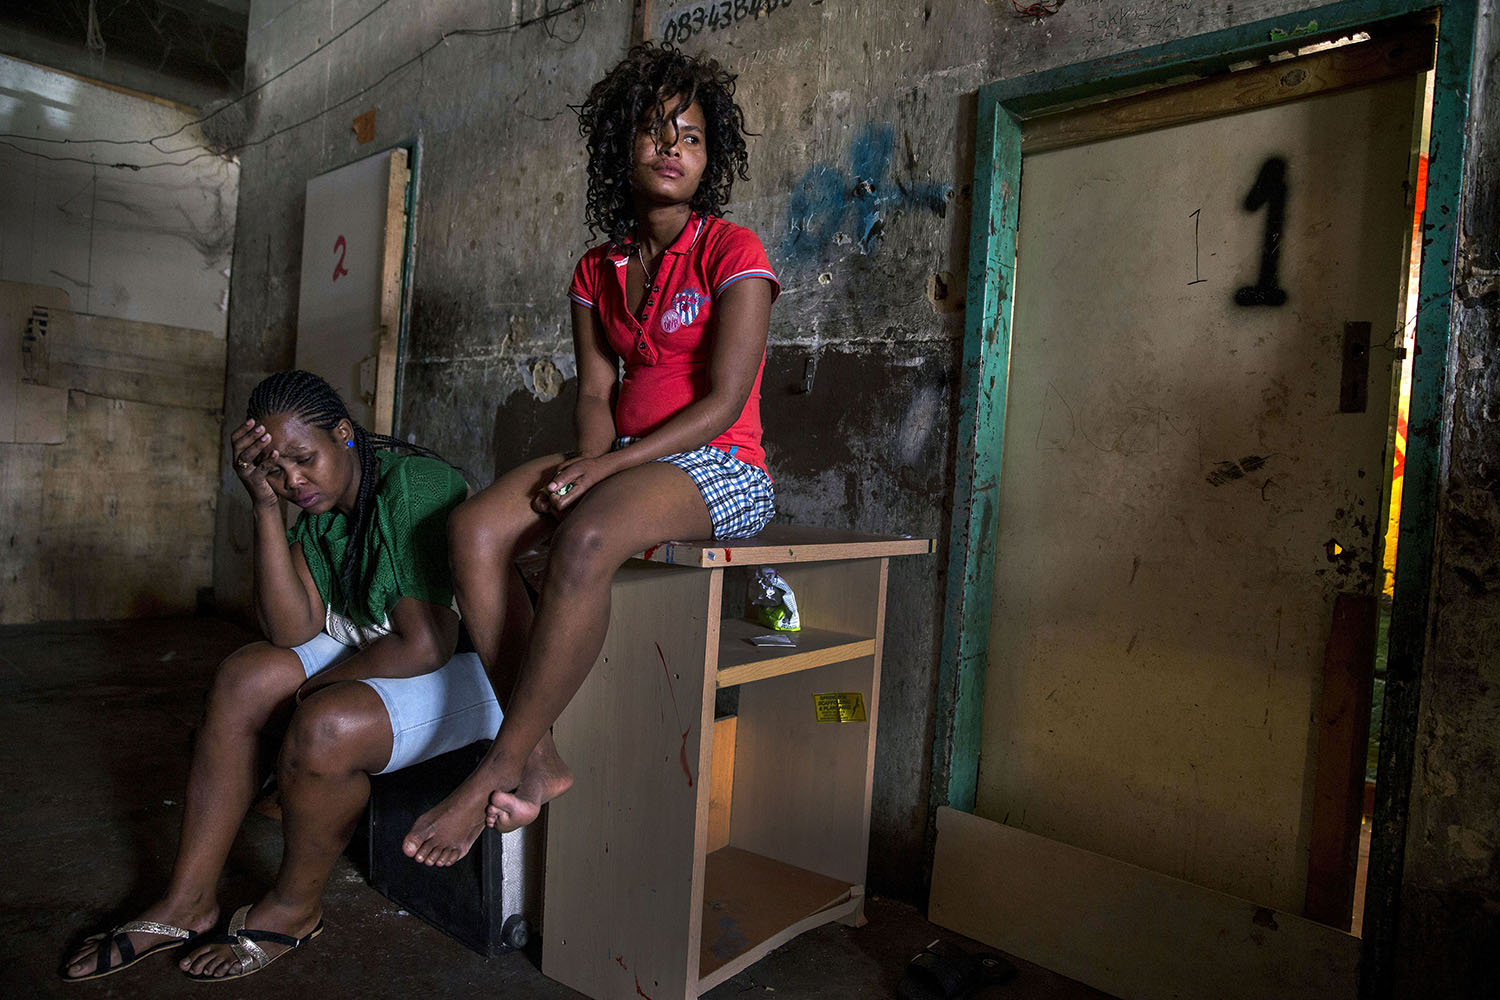 African migrant residents at one of the derelict buildings, May 22, 2015.